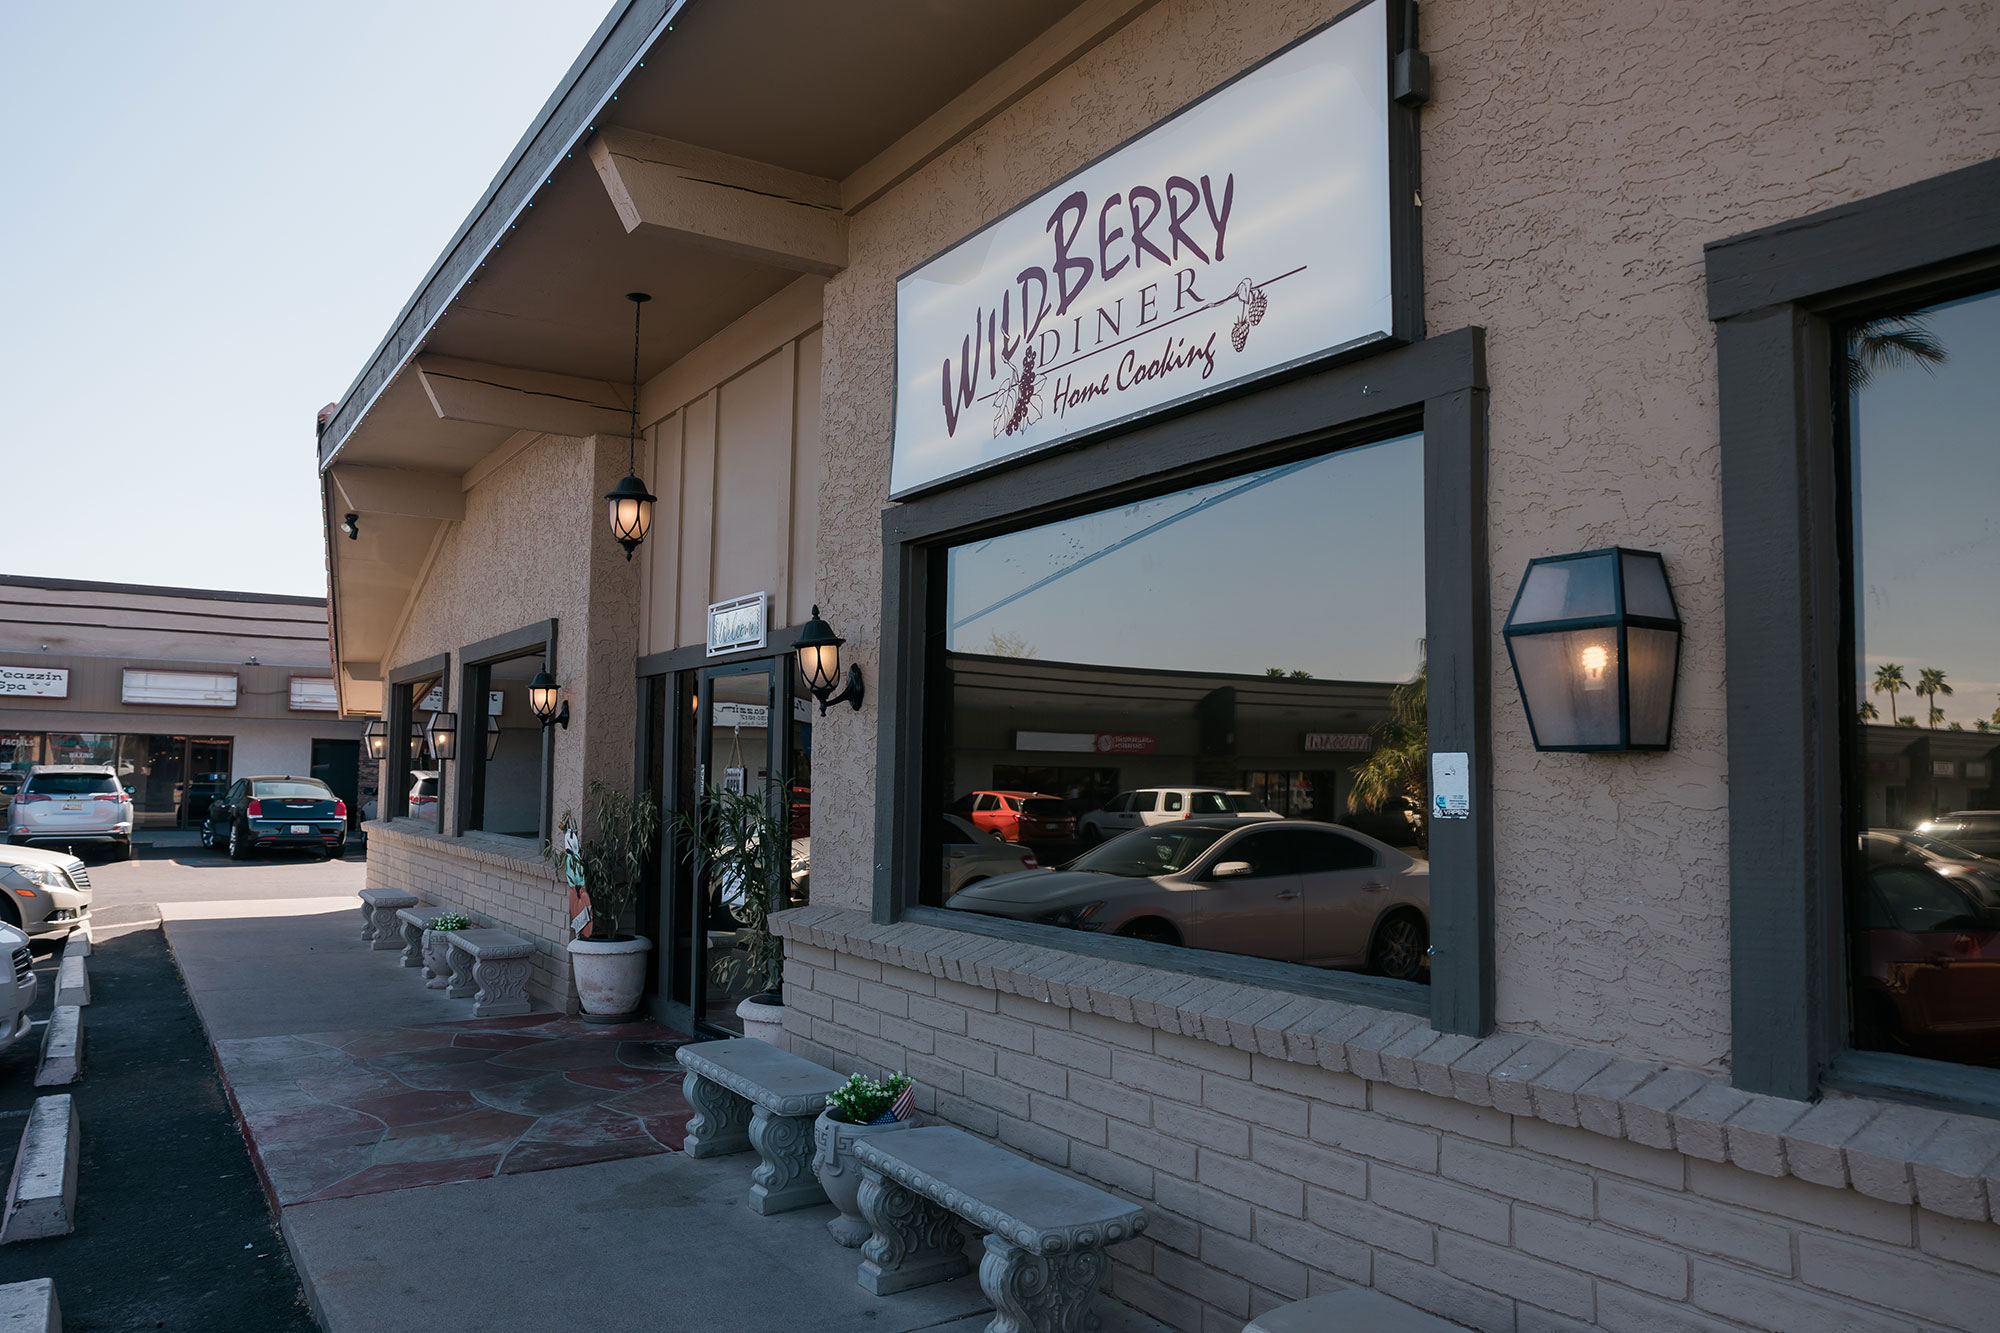 Wild Berry Diner from the front of the building